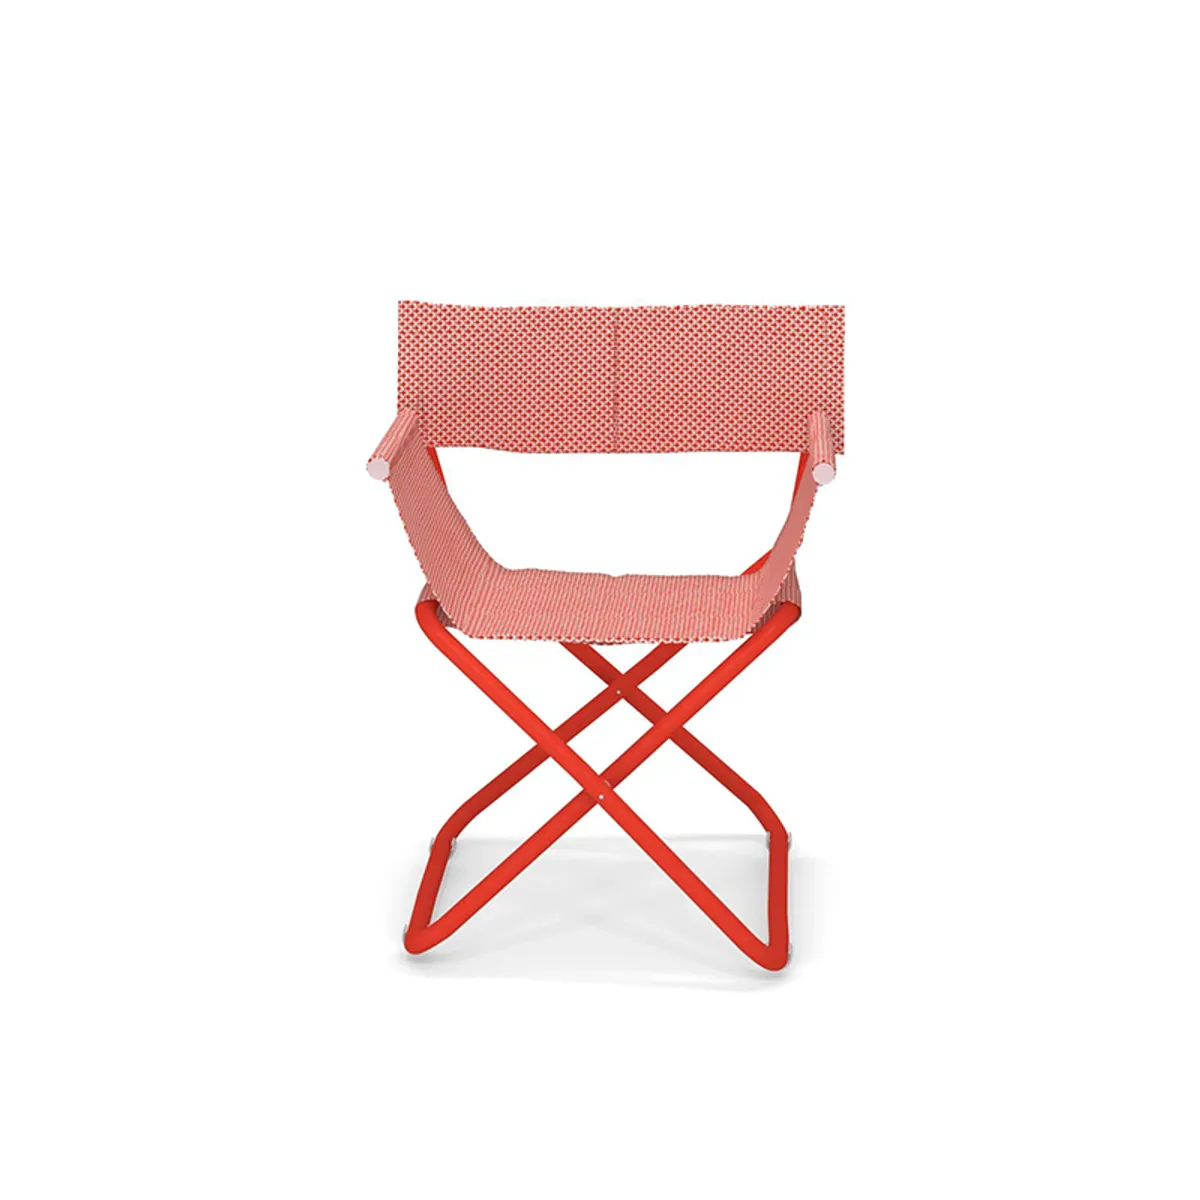 Snooze Folding Chair For Outdoor Areas 022